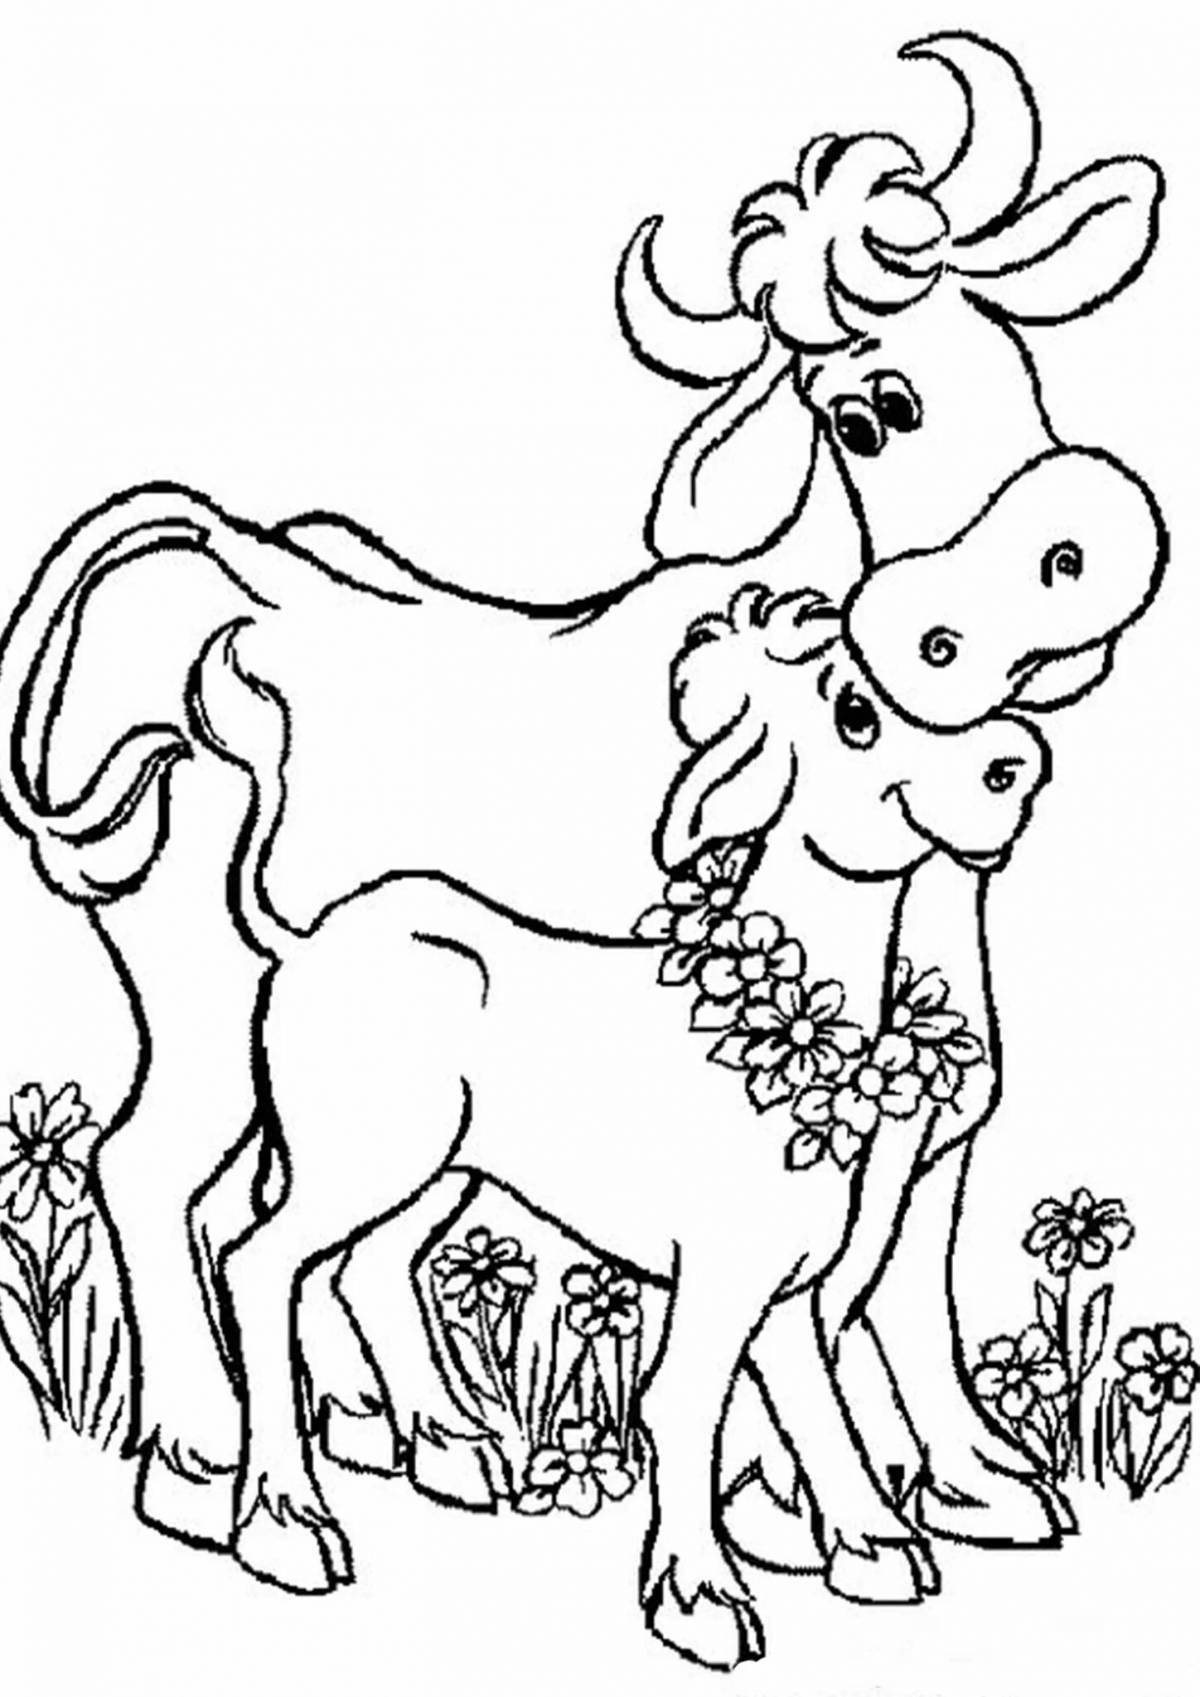 Happy cow and calf coloring page